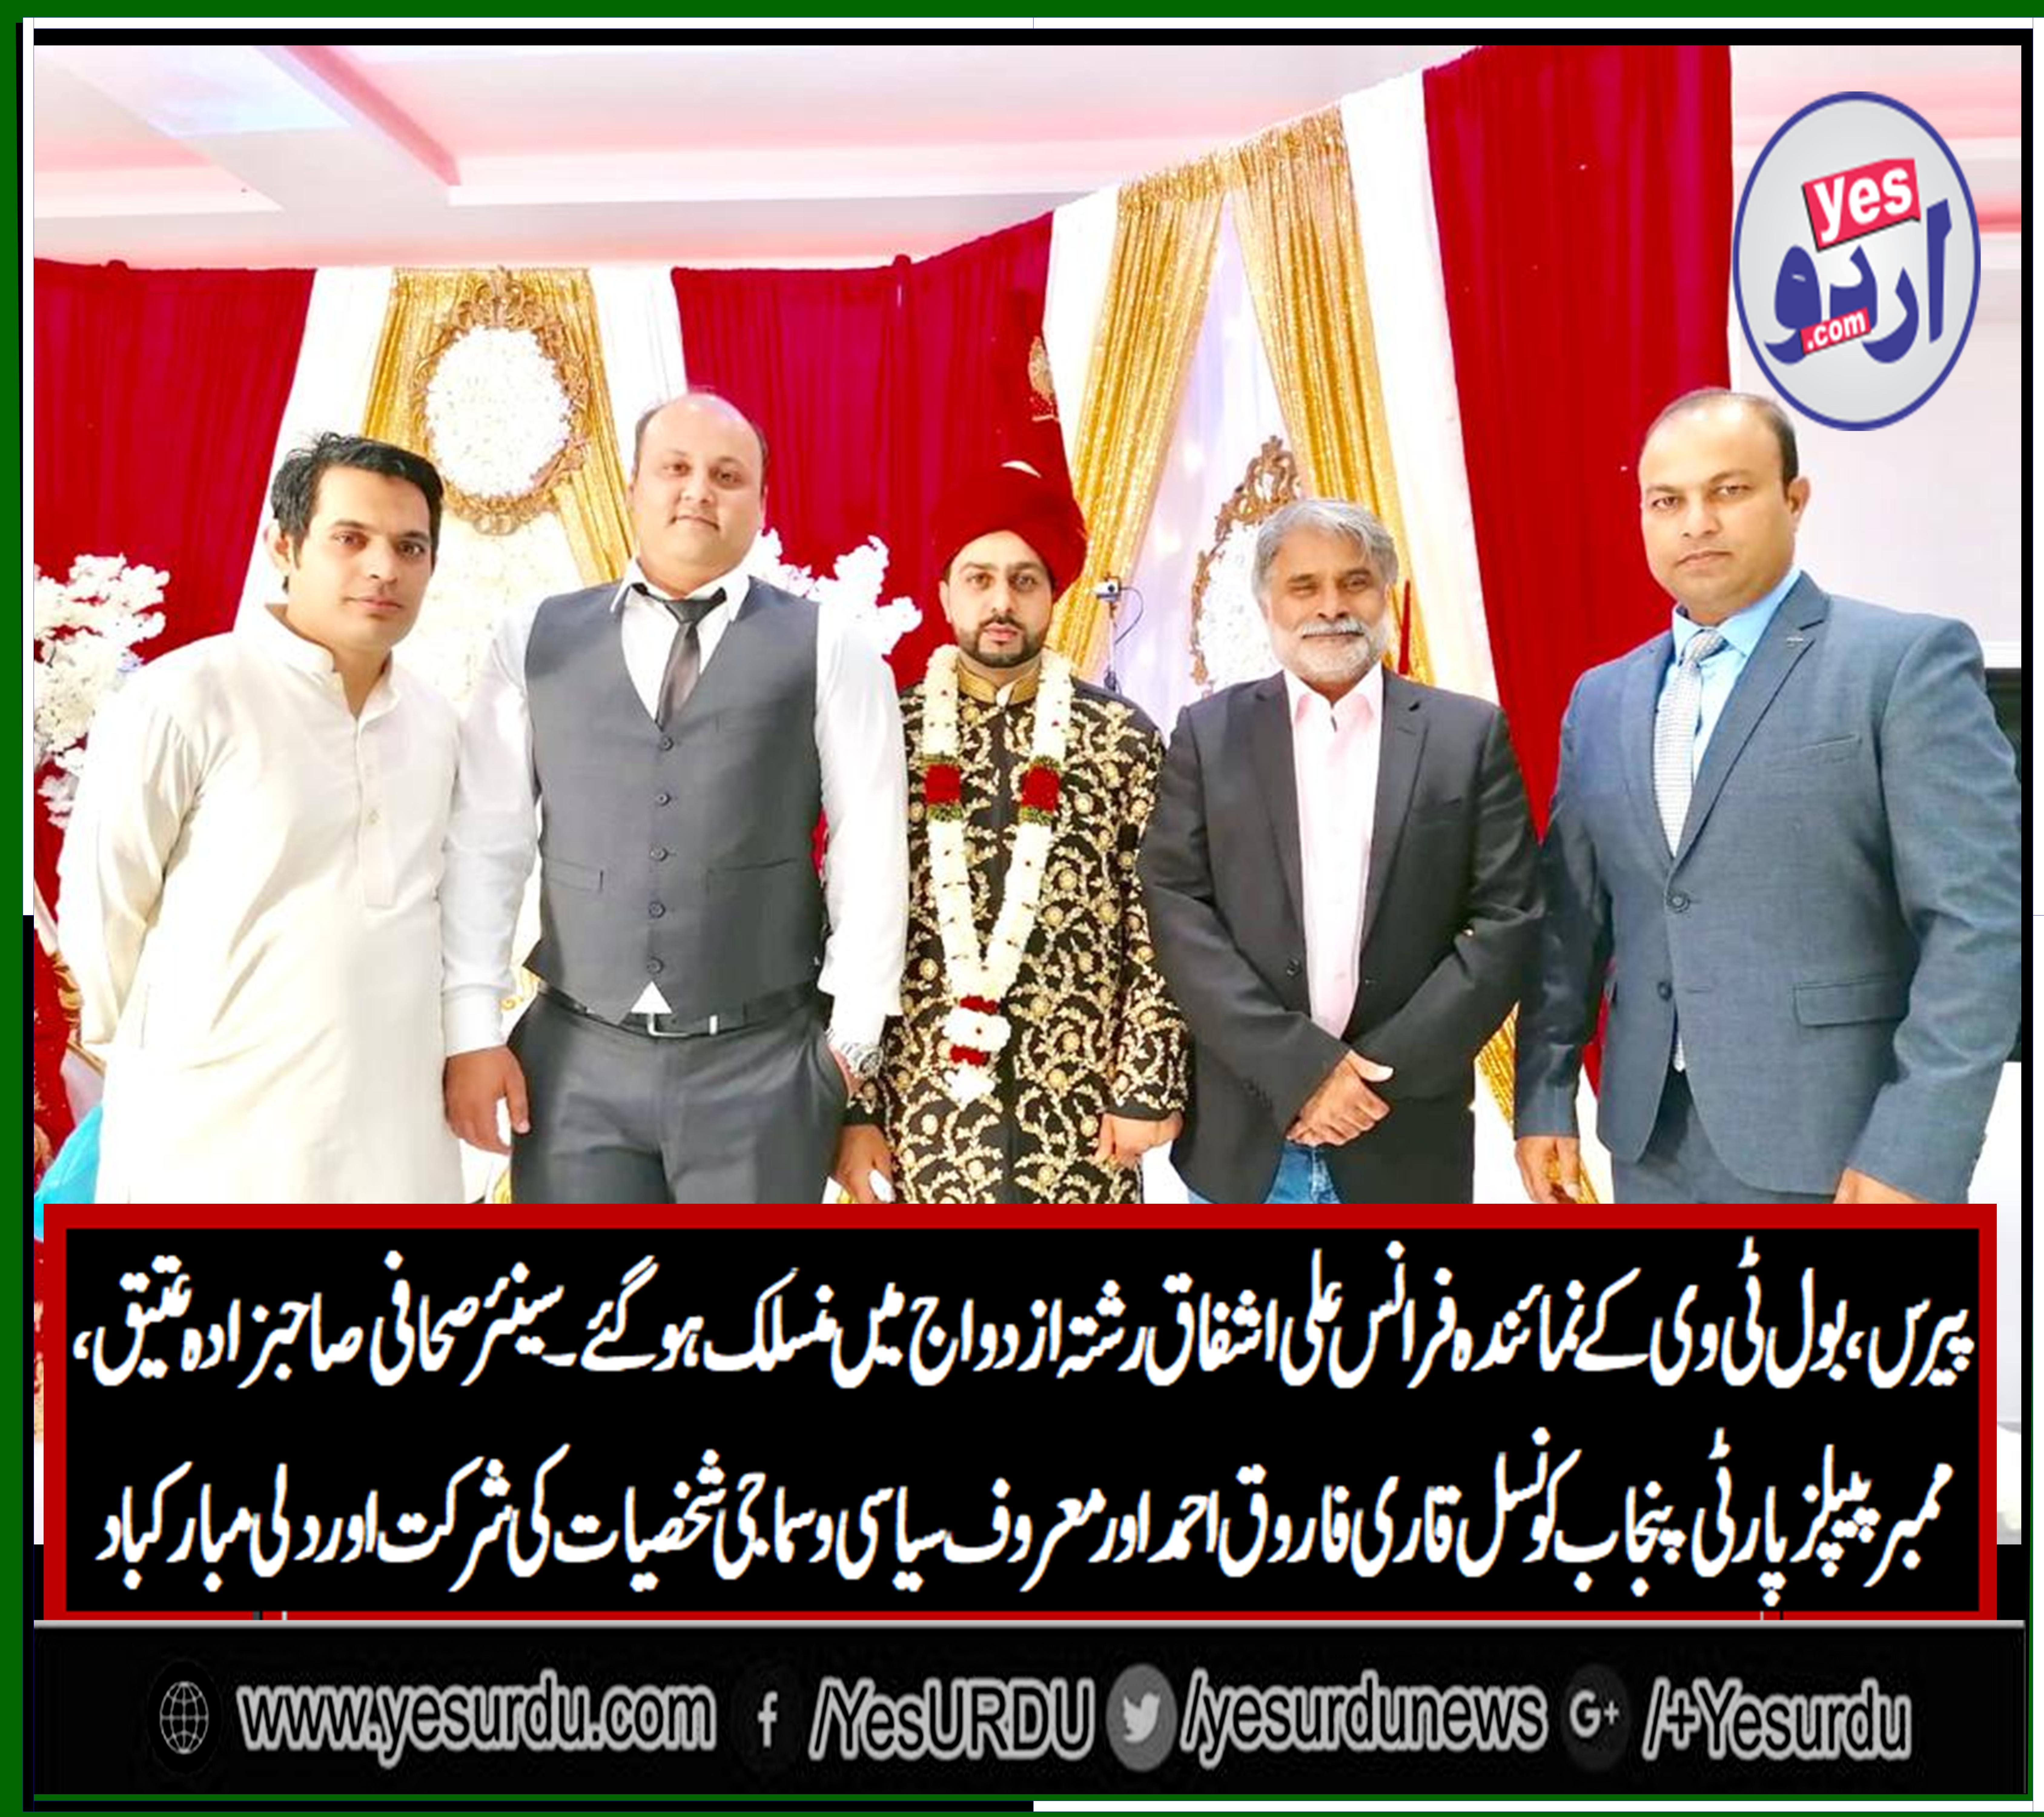 ali ashfaq, correspondent, Bol Tv, France, married, qari farooq ahmed, sahibzada atteeq, and, social, and, political, personalities, participated, and, wished, him, best, of, ife